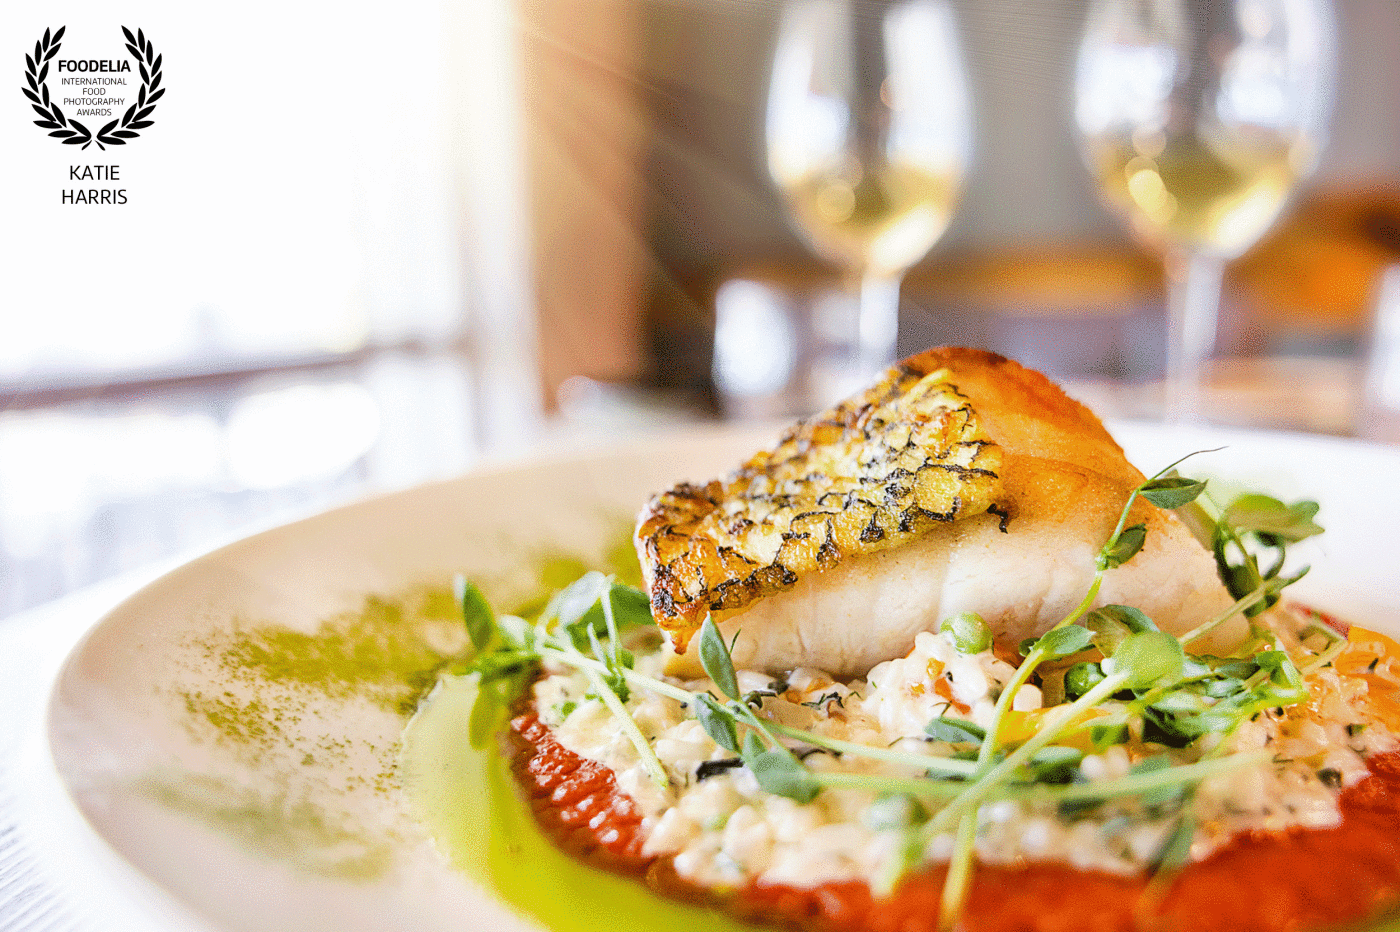 Chilean Sea Bass with spring pea risotto, pea tendrils, and basque pepper coulis by Executive Chef Justin Hayes with Cork & Flame in Evans, GA.